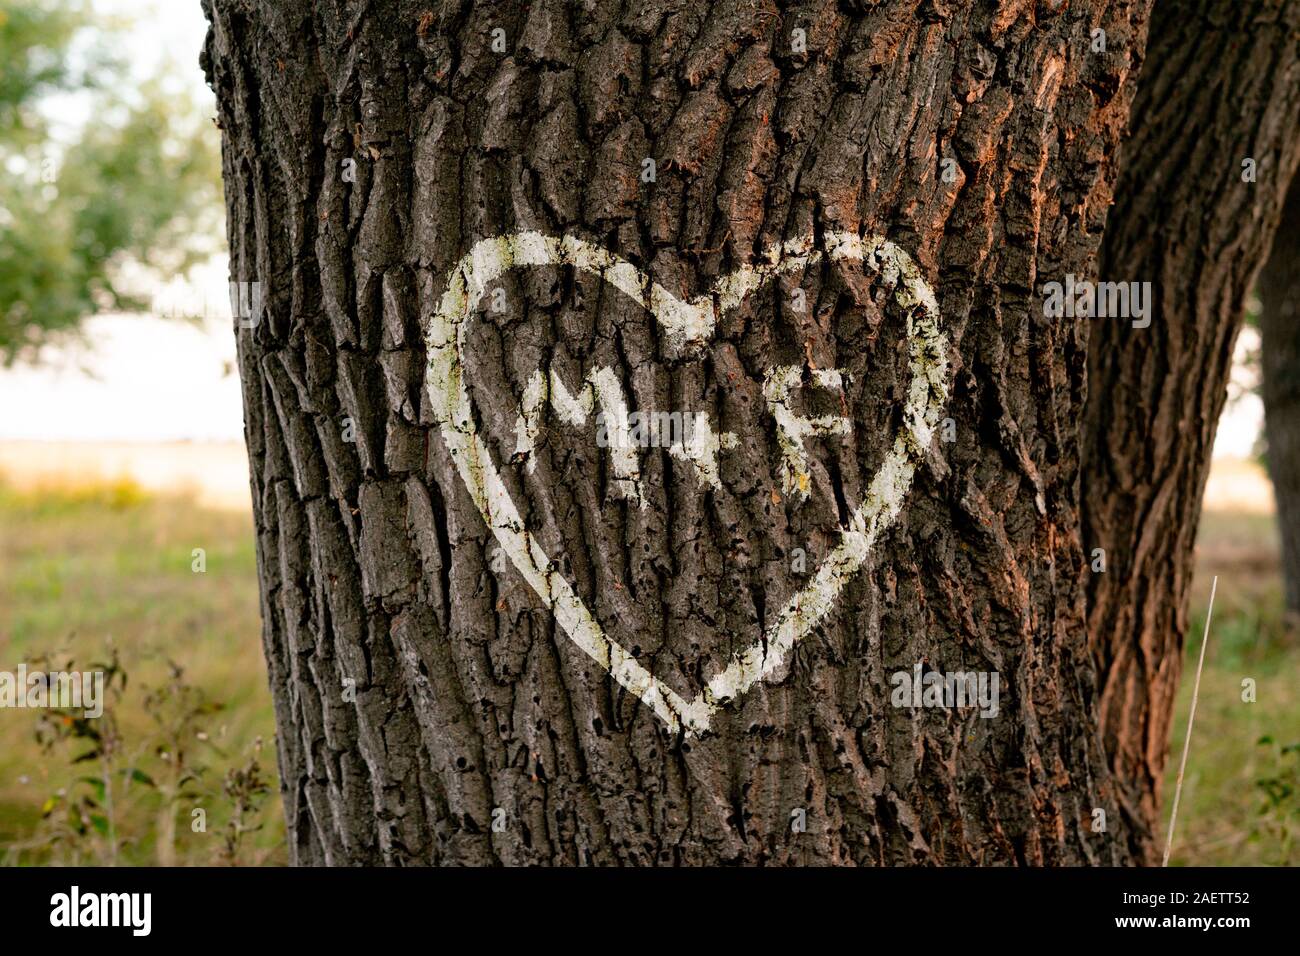 names of peopel who love each other in the shape of heart carved on the tree Stock Photo